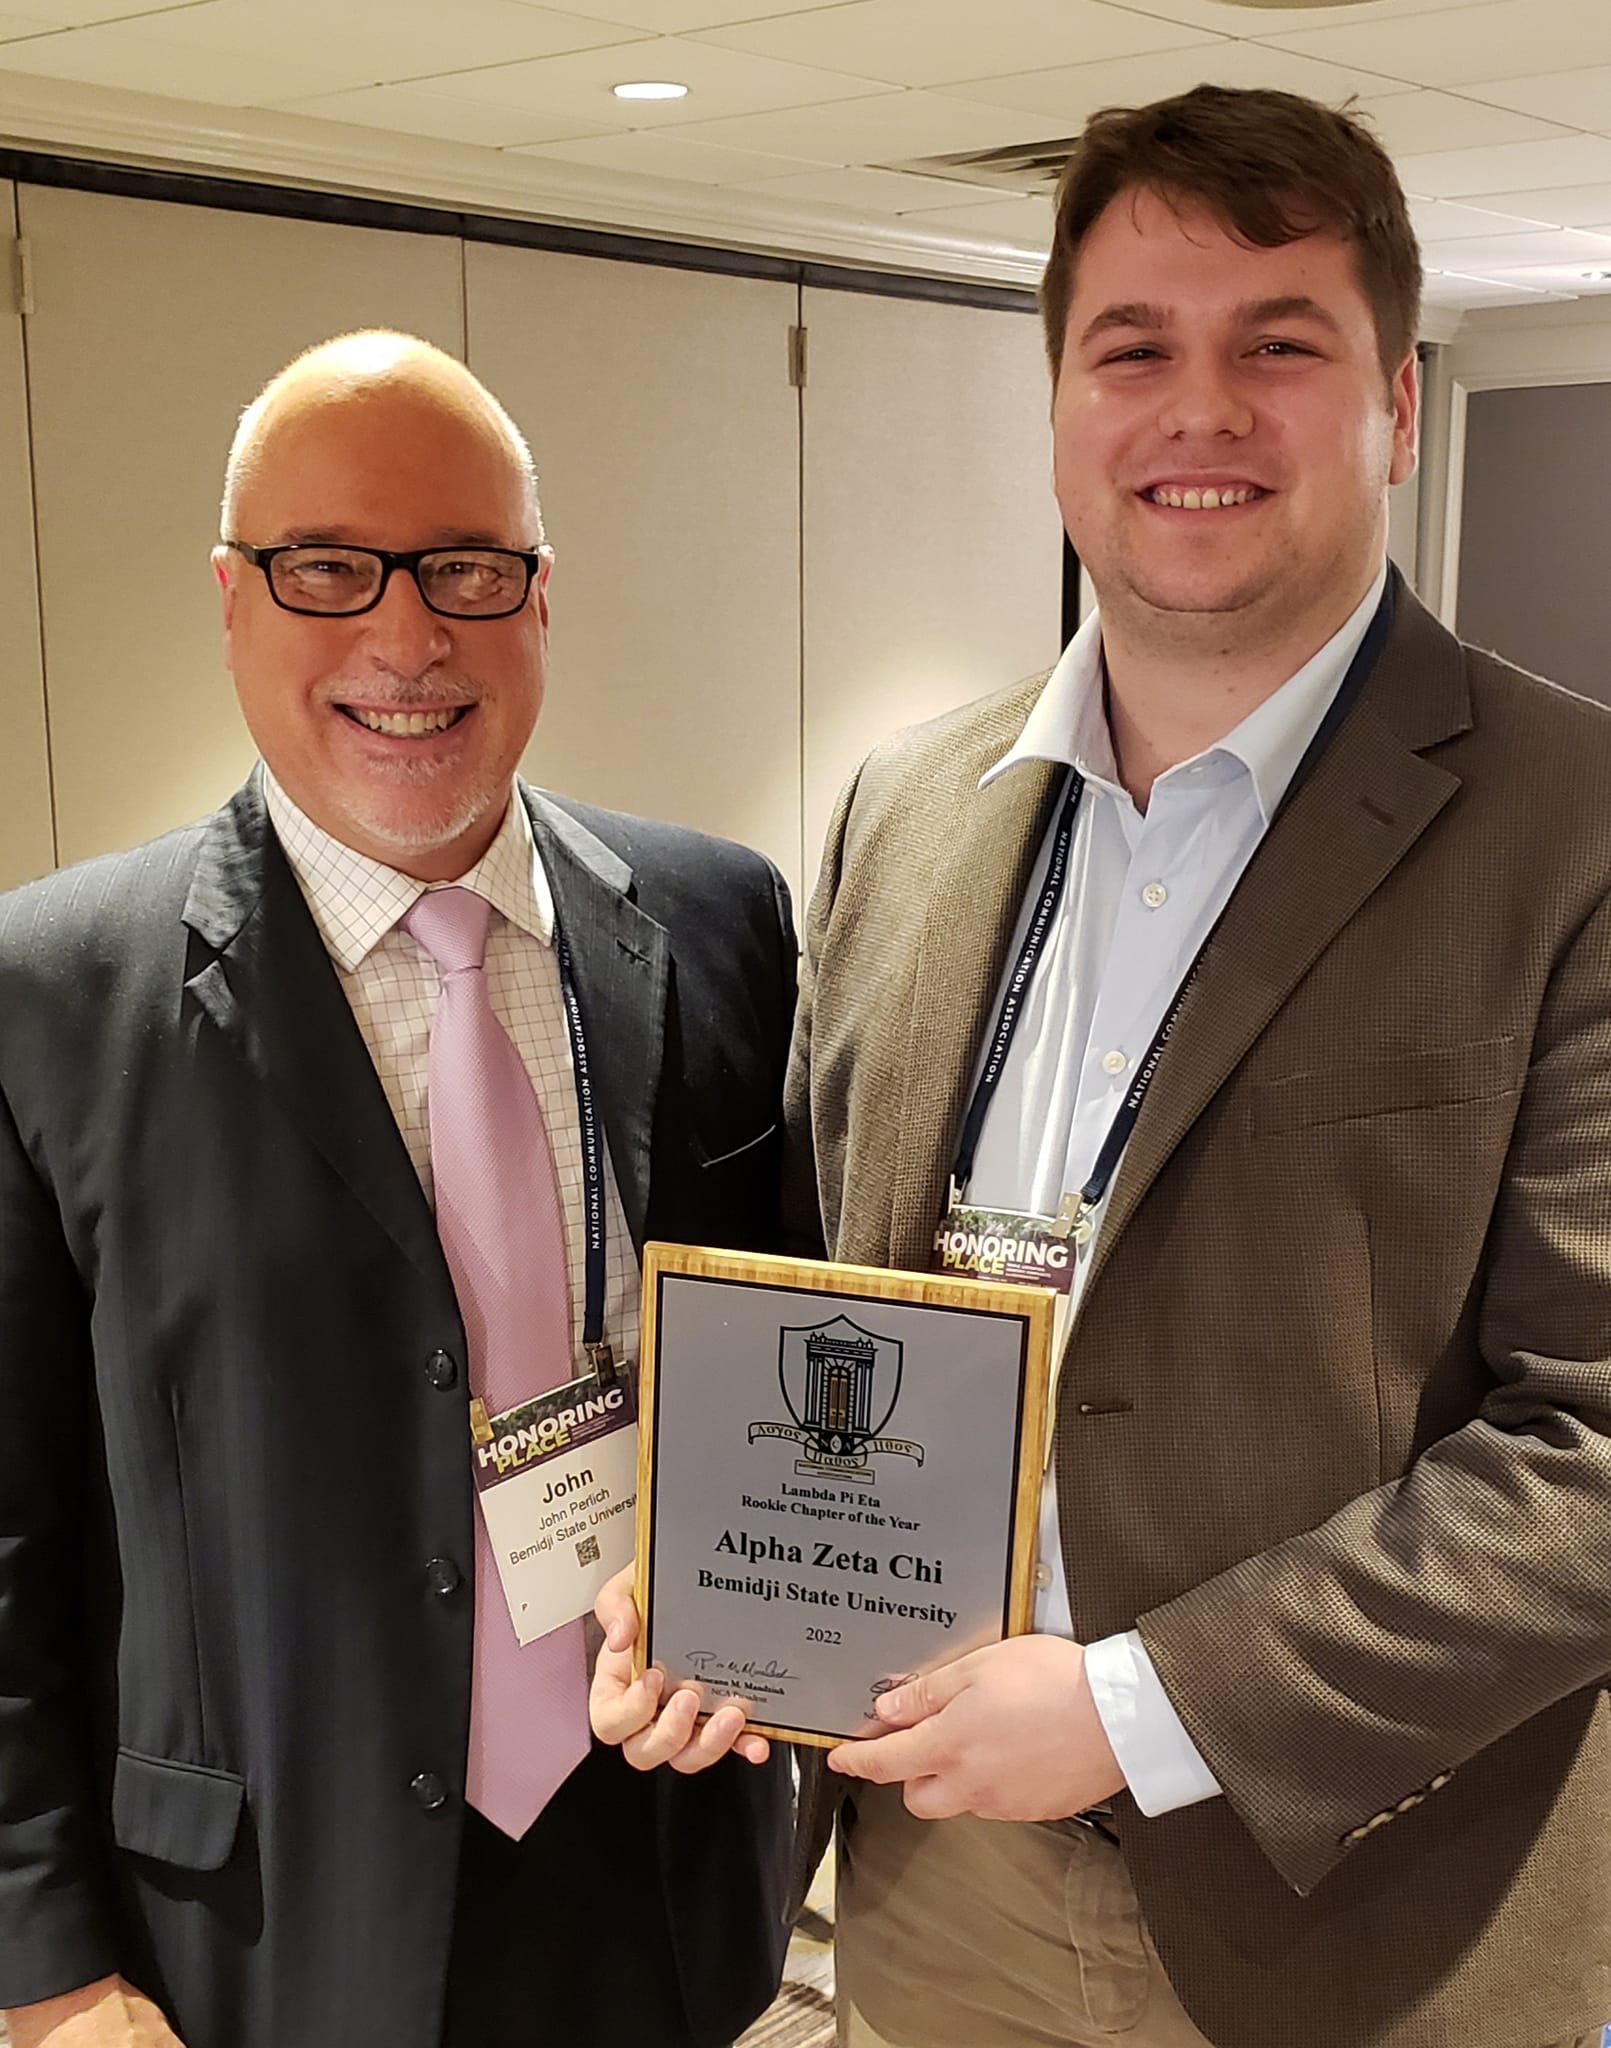 Associate professor and Alpha Zeta Chi advisor Dr. John Perlich, left, and BSU student Cameron Burnap accept the Rookie Chapter of the Year award at the NCA Annual Conference 